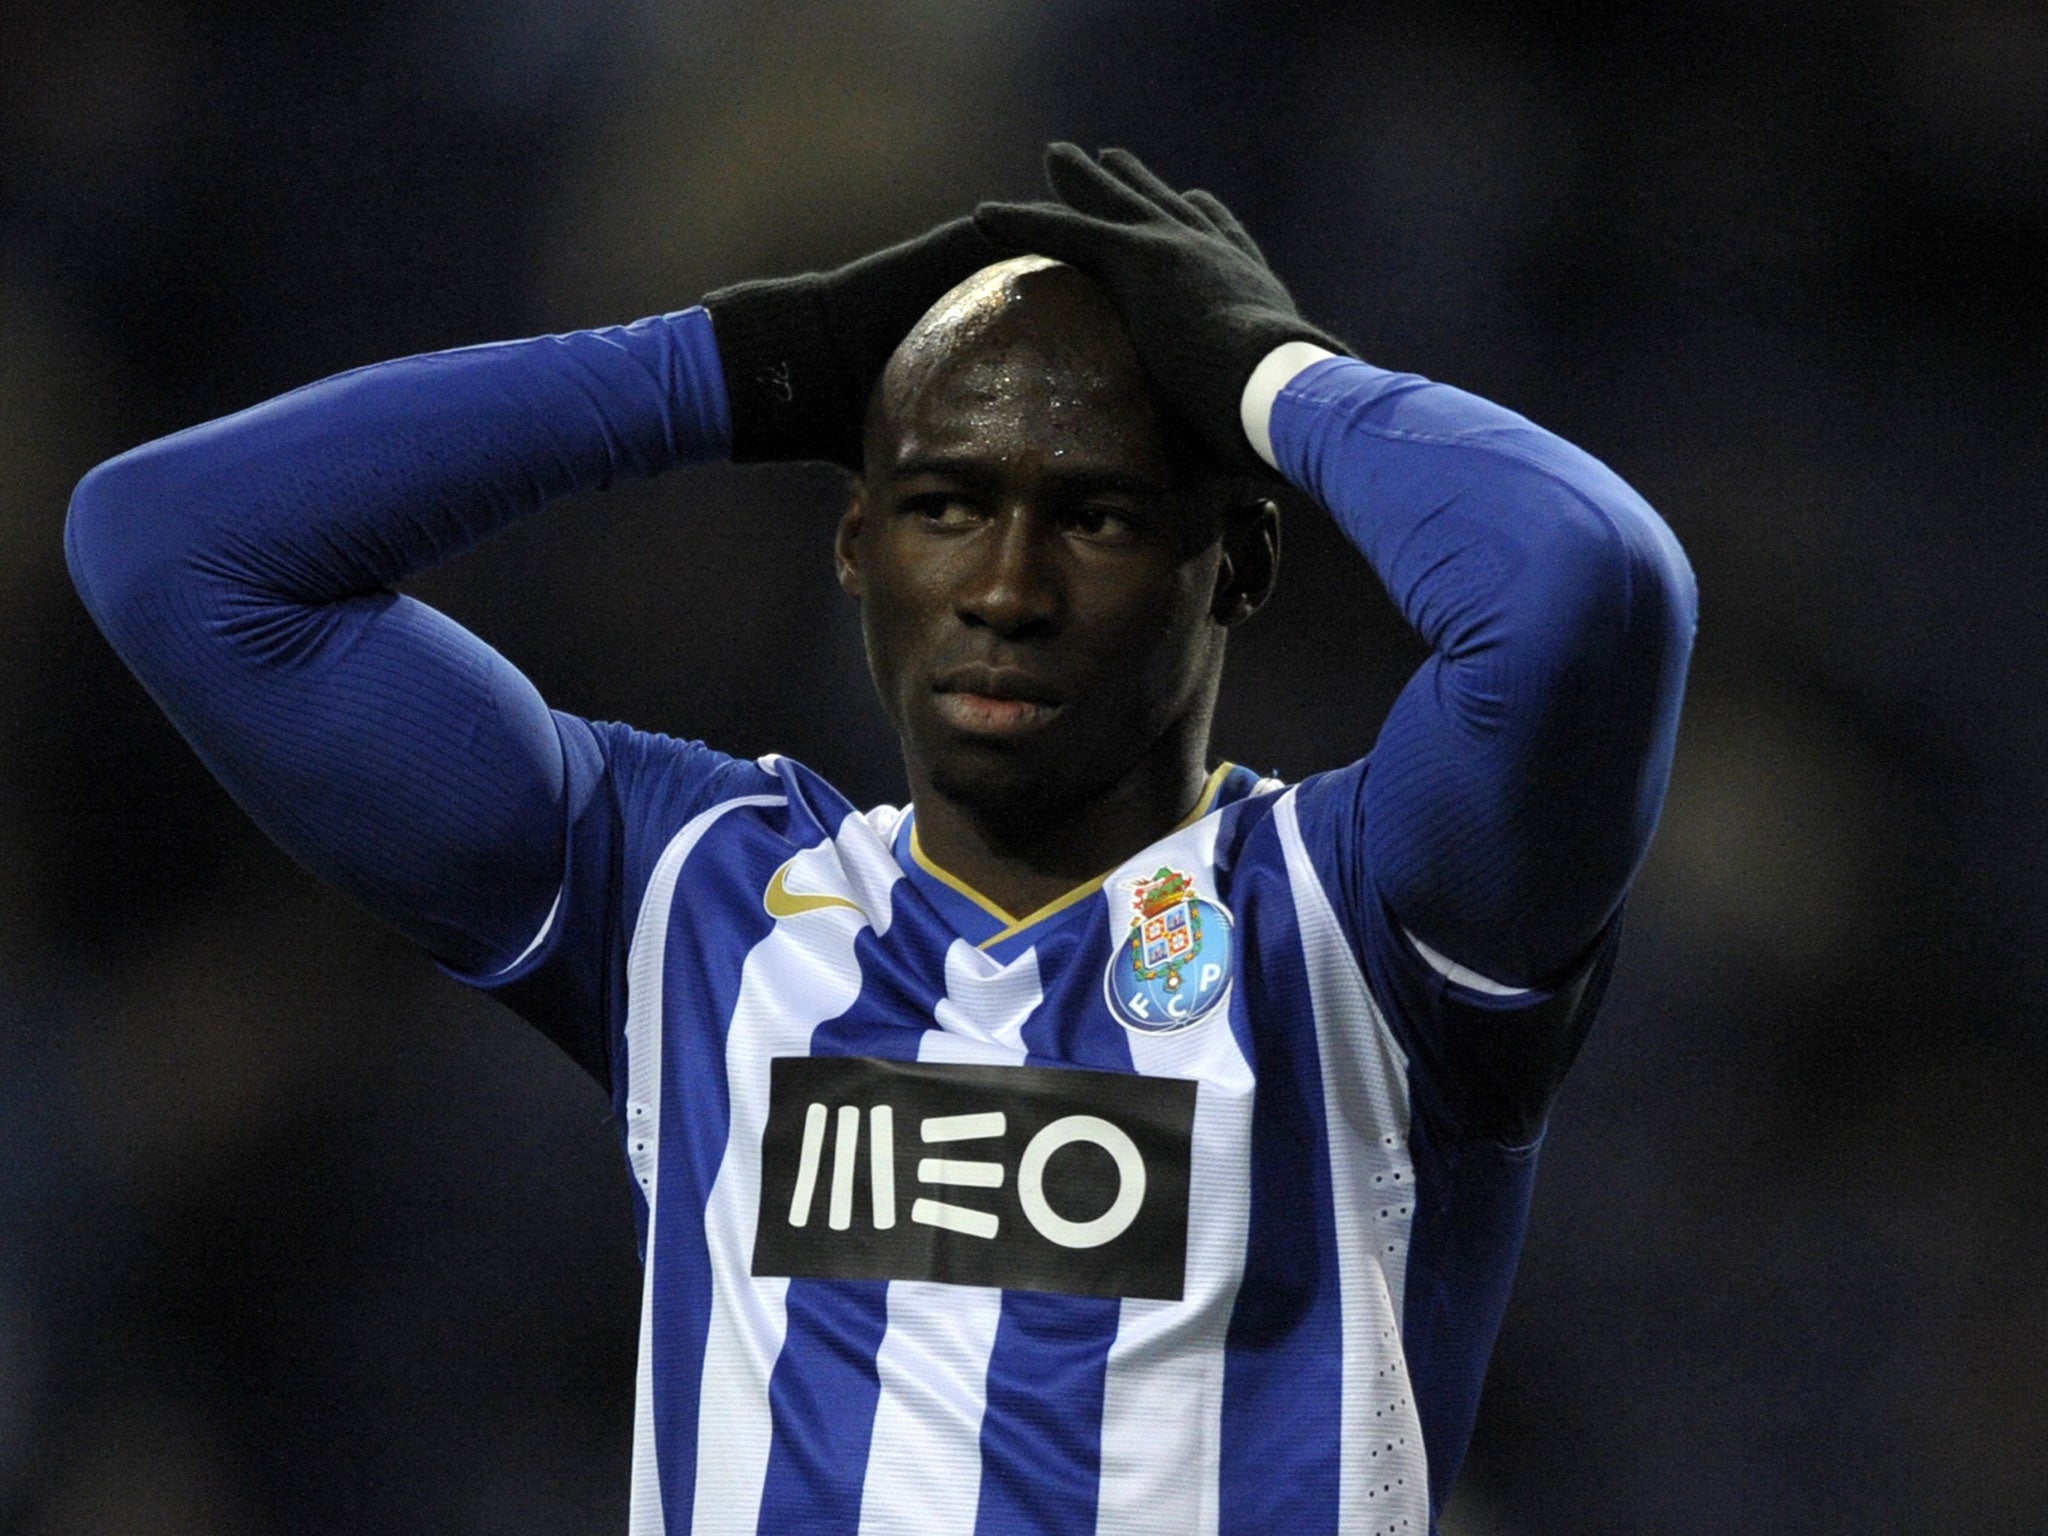 Eliaquim Mangala has also attracted interest from Manchester United and Paris Saint-Germain